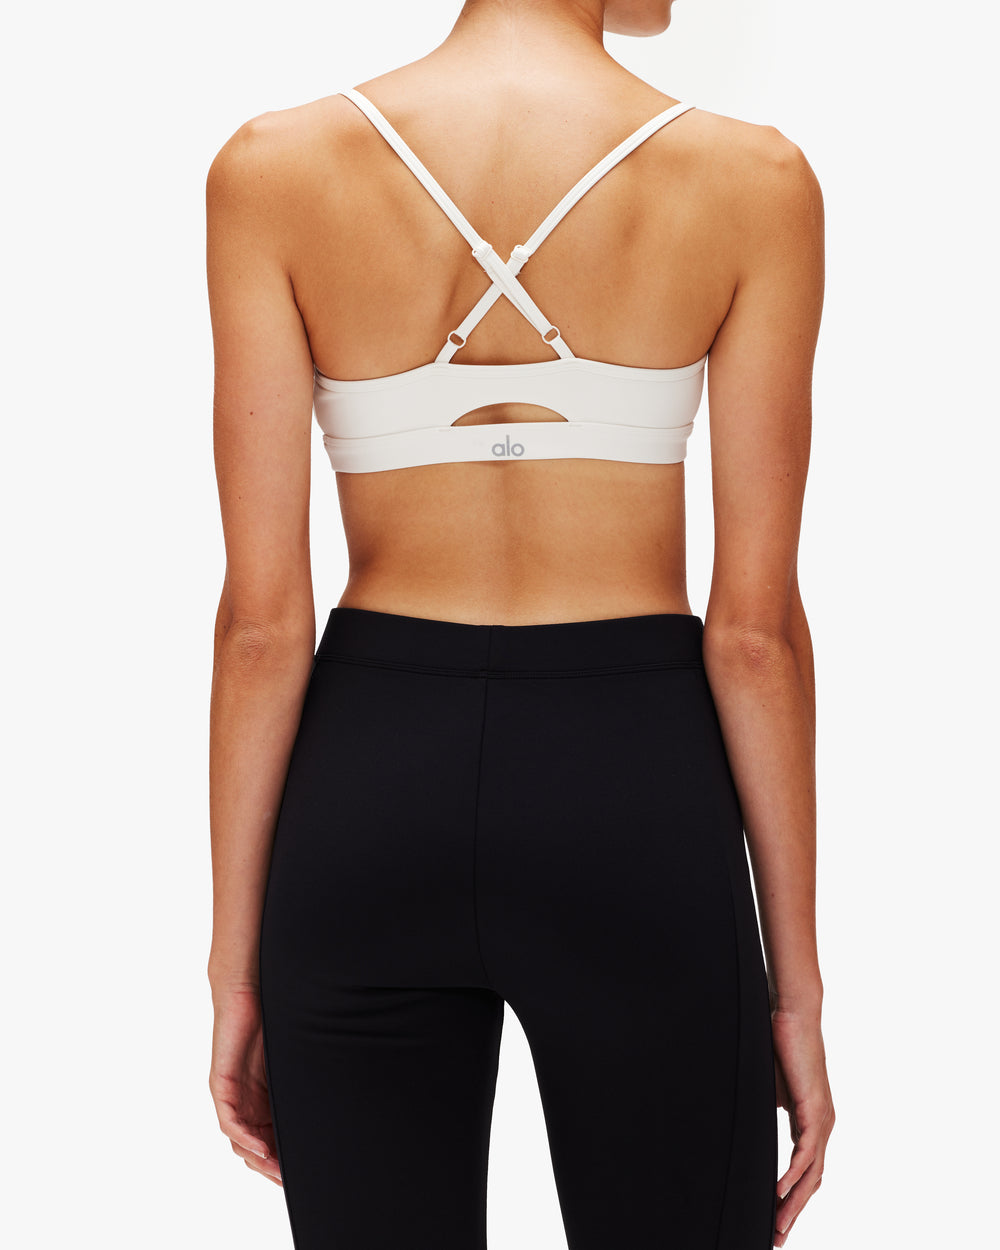 Alo Yoga Airlift Intrigue Bra The Shop At Equinox